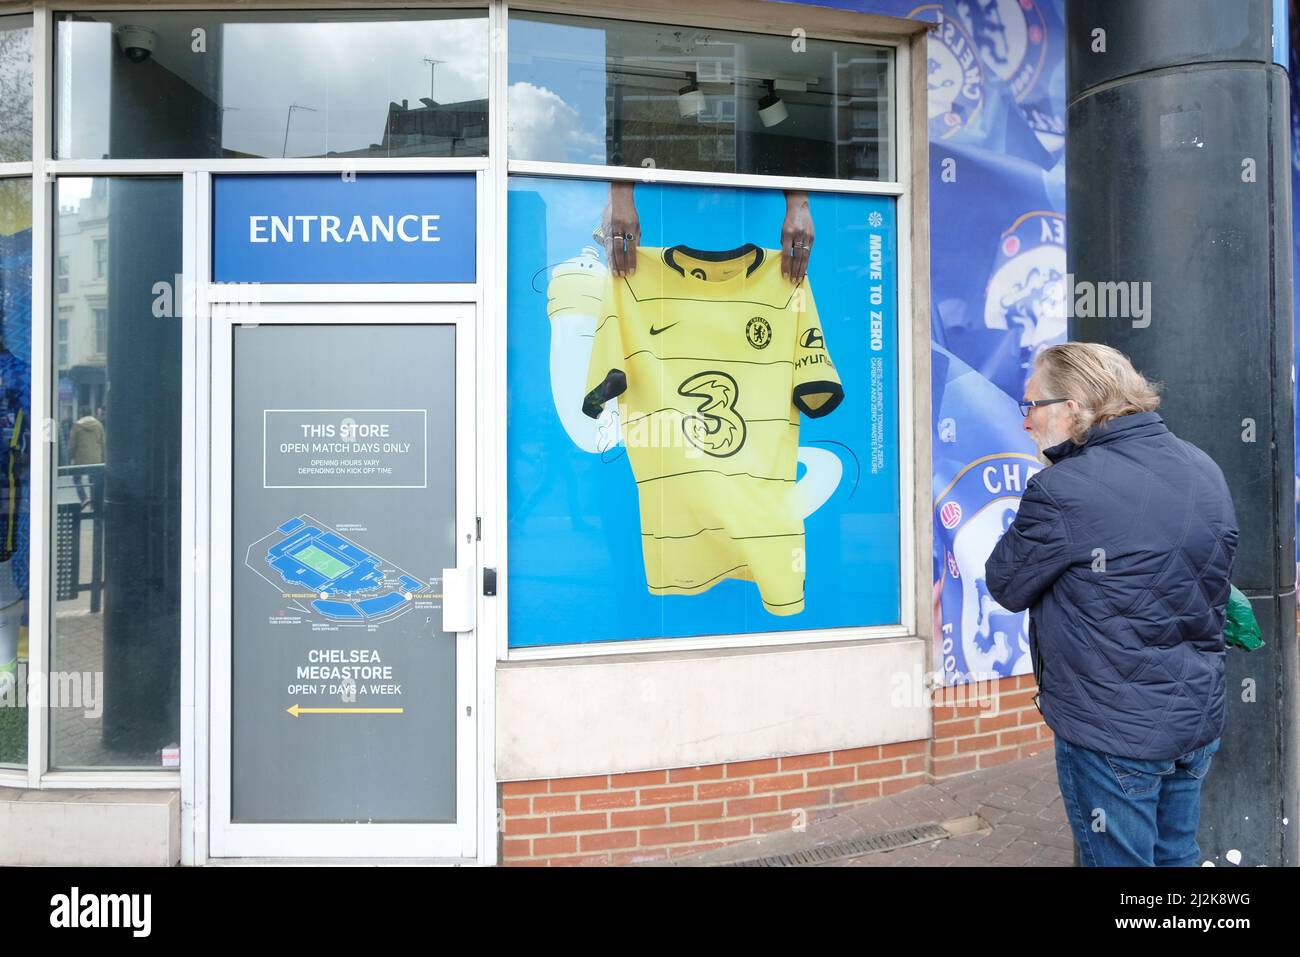 London, UK, 2nd April, 2022. A man stands outside the Chelsea football club shop which has been closed for several weeks after owner Roman Abramovich was removed as the club's owner, ticket sales halted and merchandise sales were banned. Credit: Eleventh Hour Photography/Alamy Live News Stock Photo